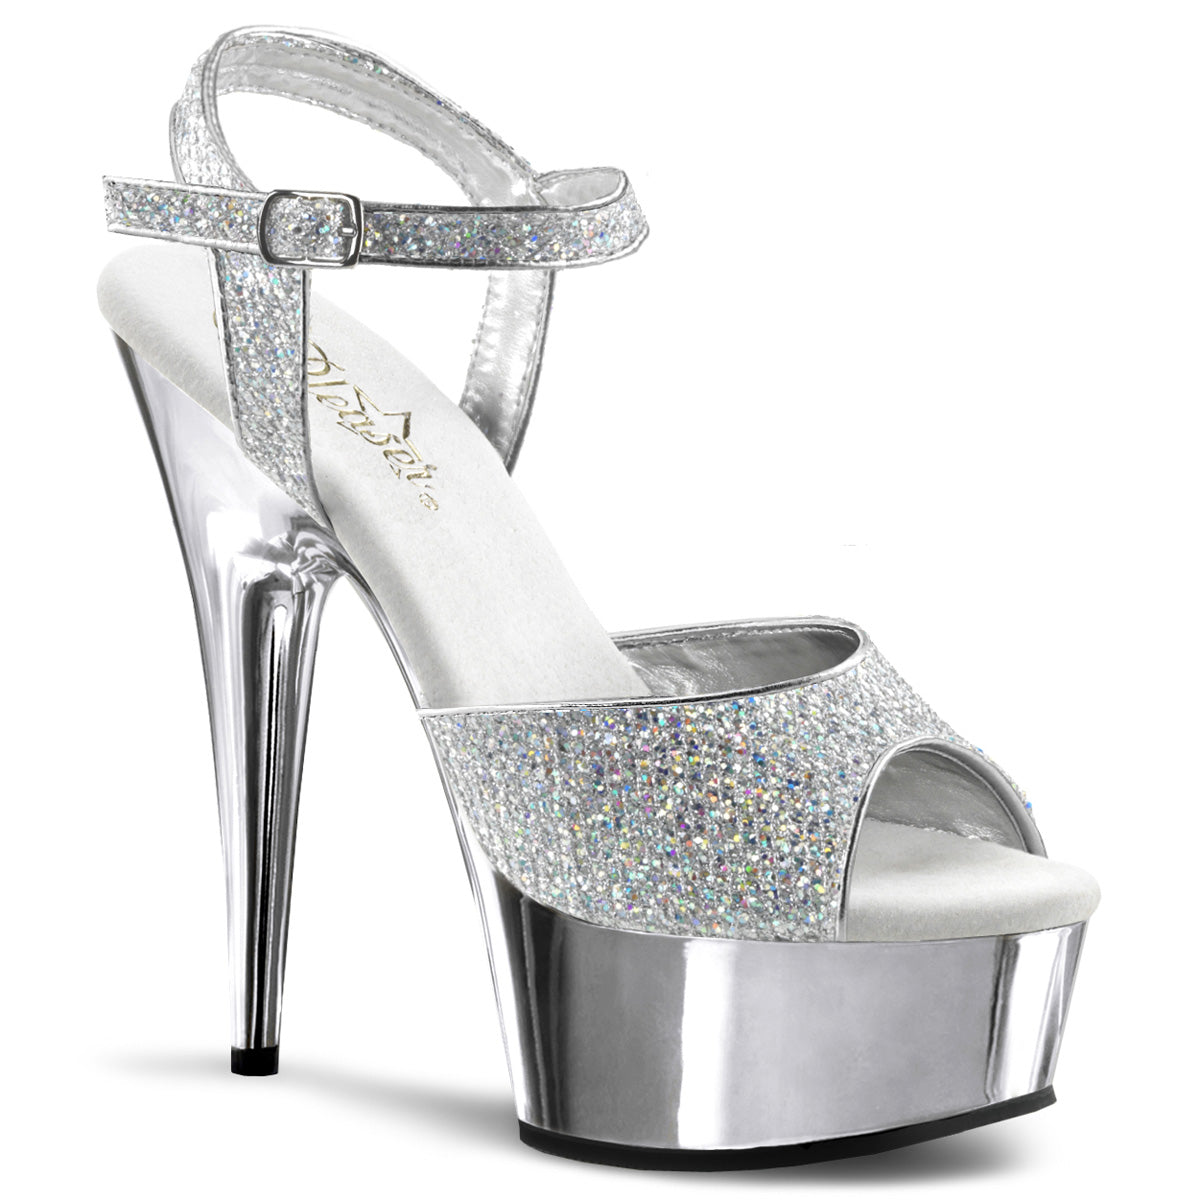 DELIGHT-609G 6" Heel Silver Glitter Pole Dancing Platforms-Pleaser- Sexy Shoes